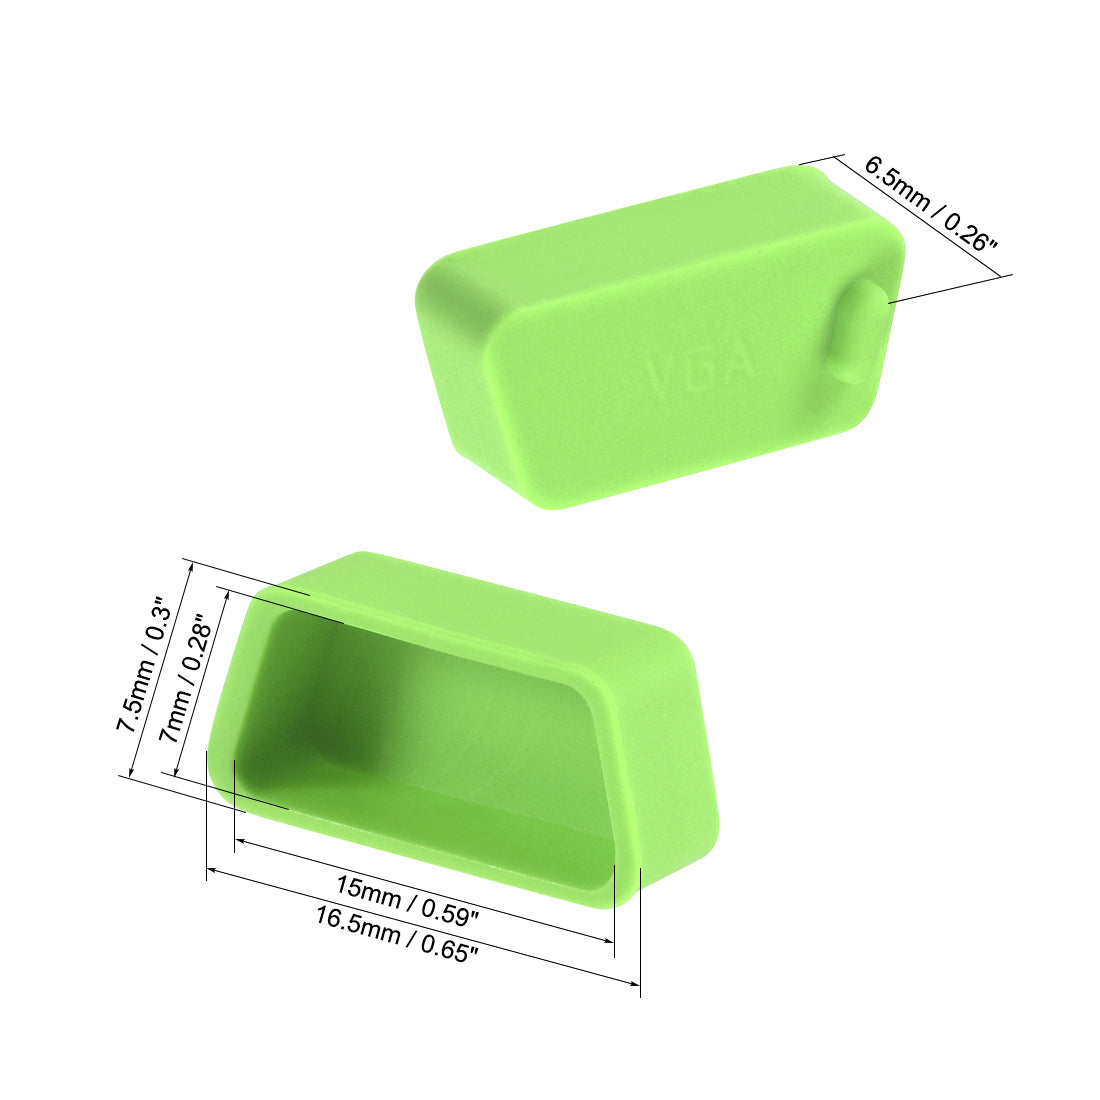 uxcell Uxcell 5pcs VGA Port Cover Silicone Anti Dust Protectors Cap for DB9, Green